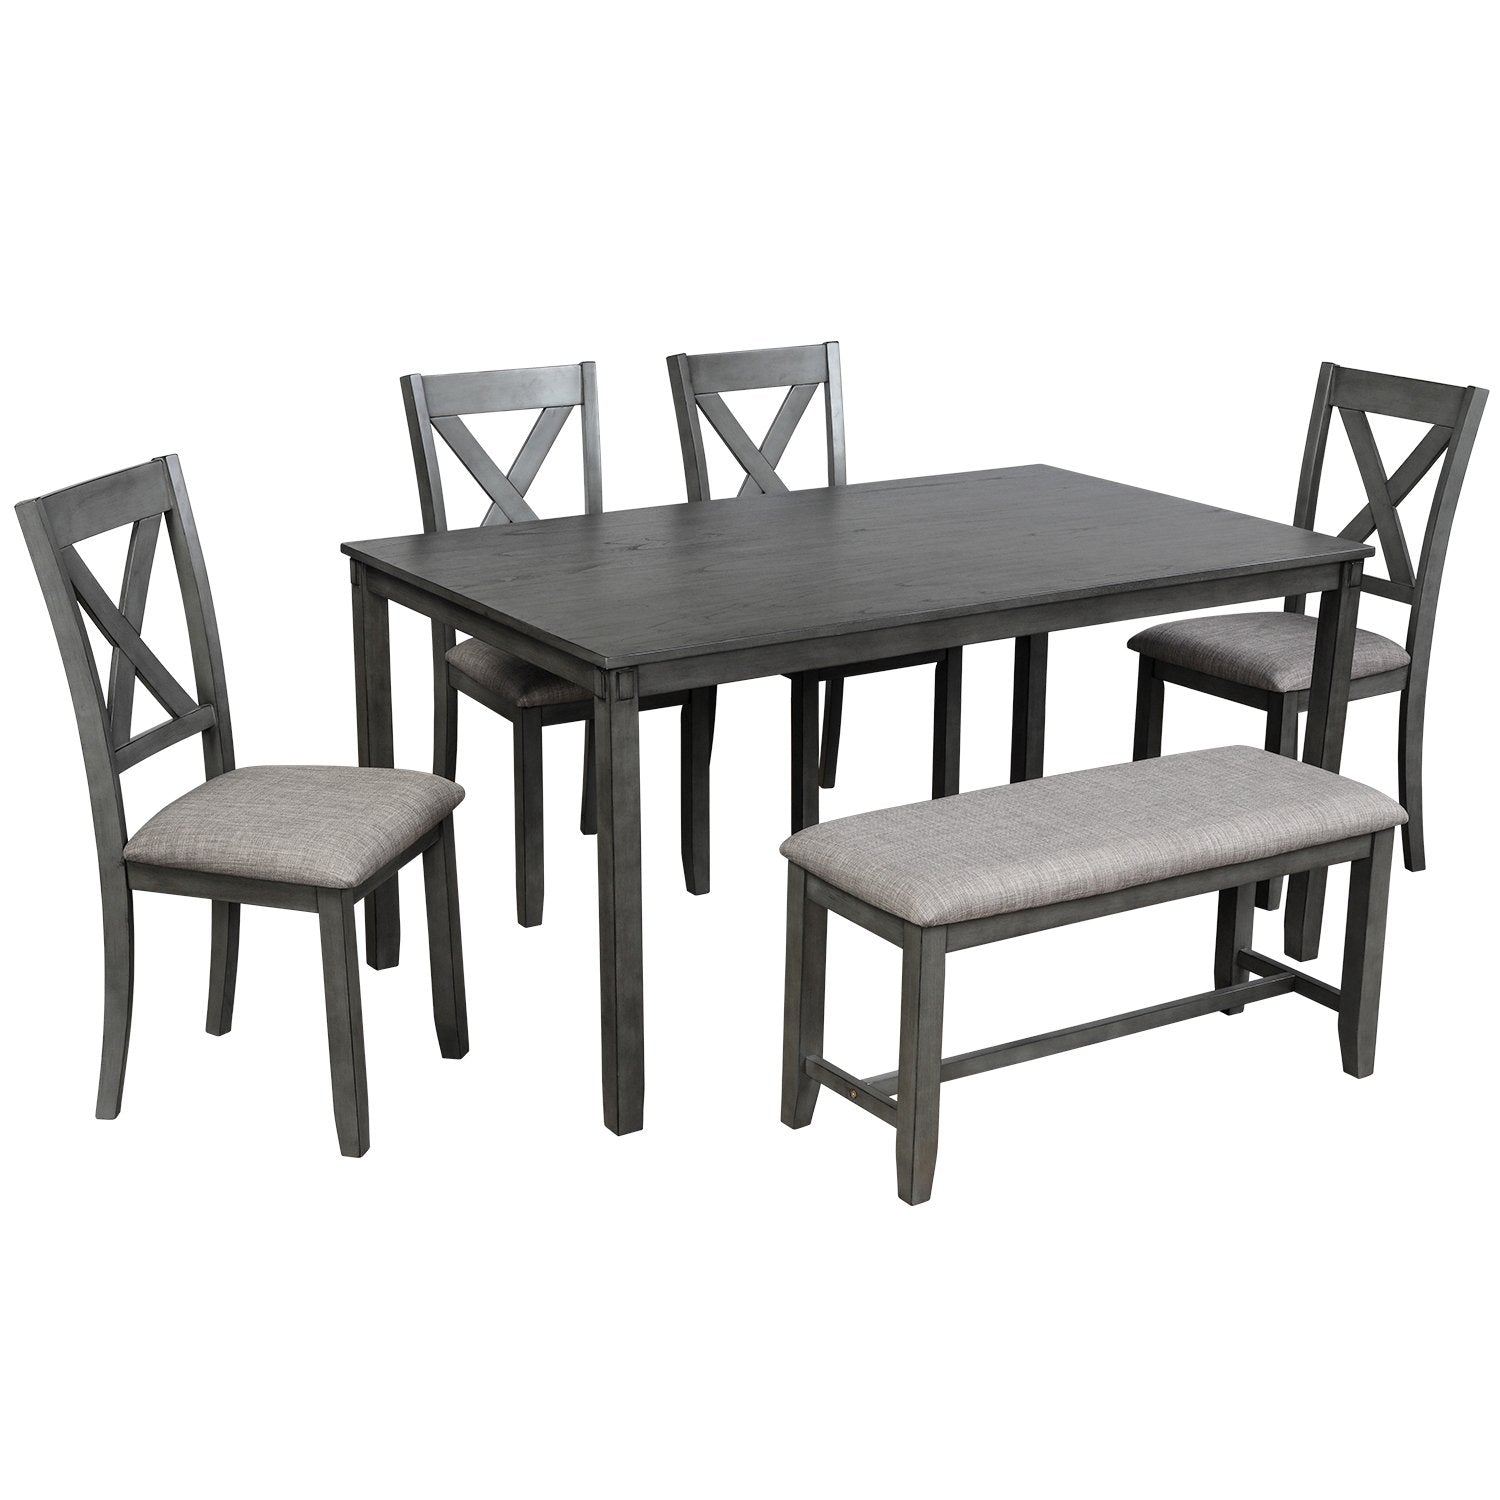 6-Piece Kitchen Dining Table Set Wooden Rectangular Dining Table, 4 Dining Chair and Bench Family Furniture for 6 People (Grey)